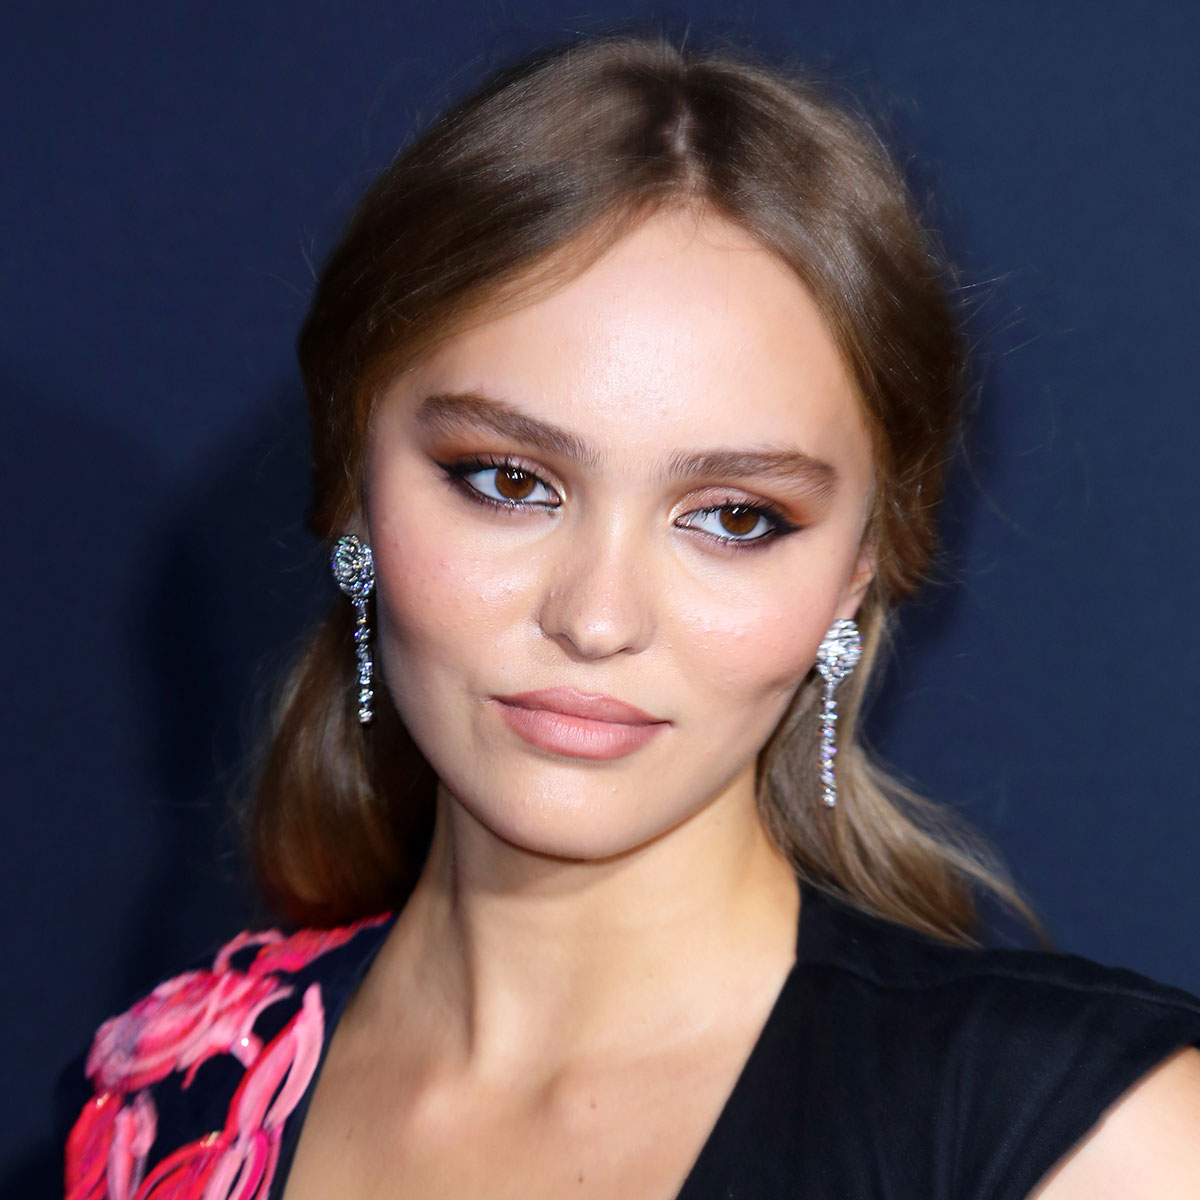 Lily-Rose Depp Is The Spitting Image Of Her Famous Mother